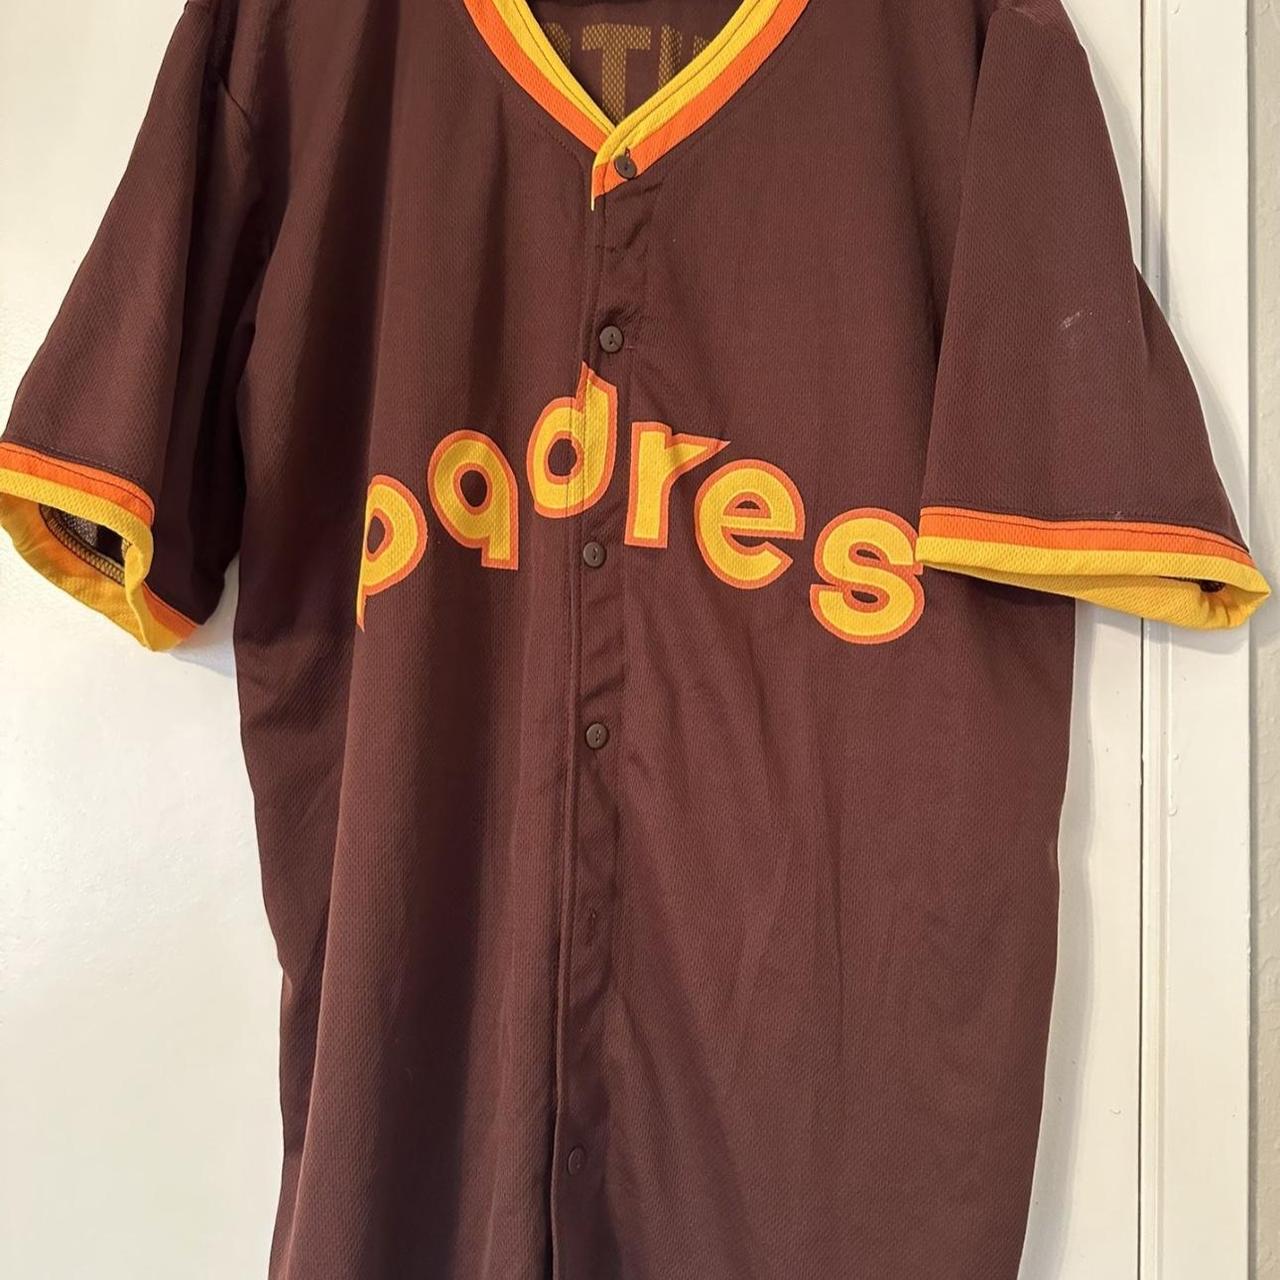 Throwback padres 78 all stars jersey embroidered - Depop